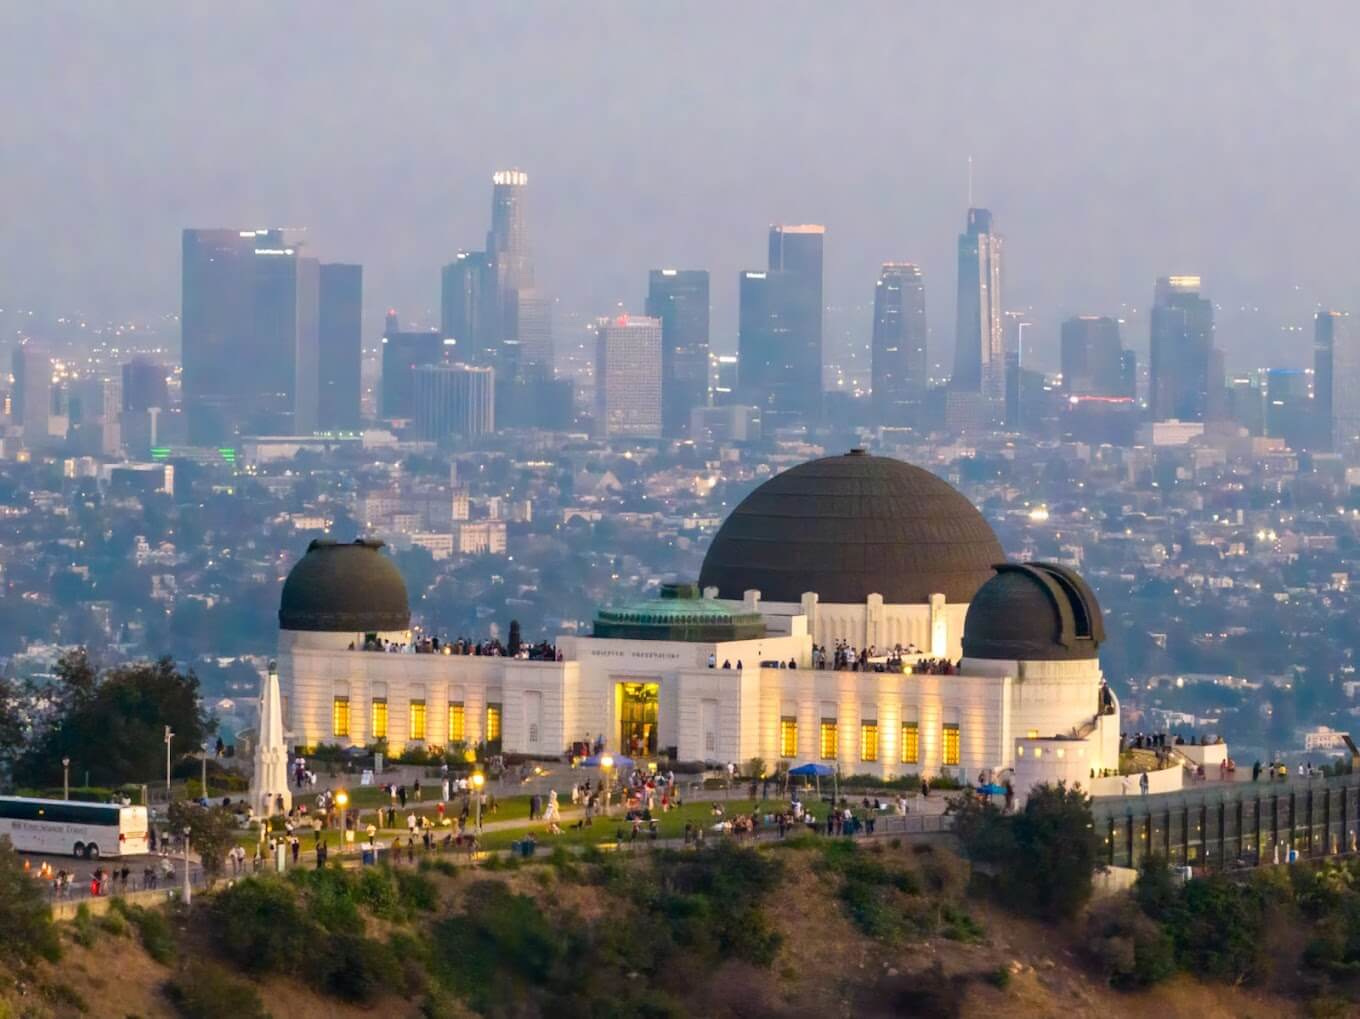 Hollywood Sign - Griffith Observatory - Southern California's gateway to  the cosmos!